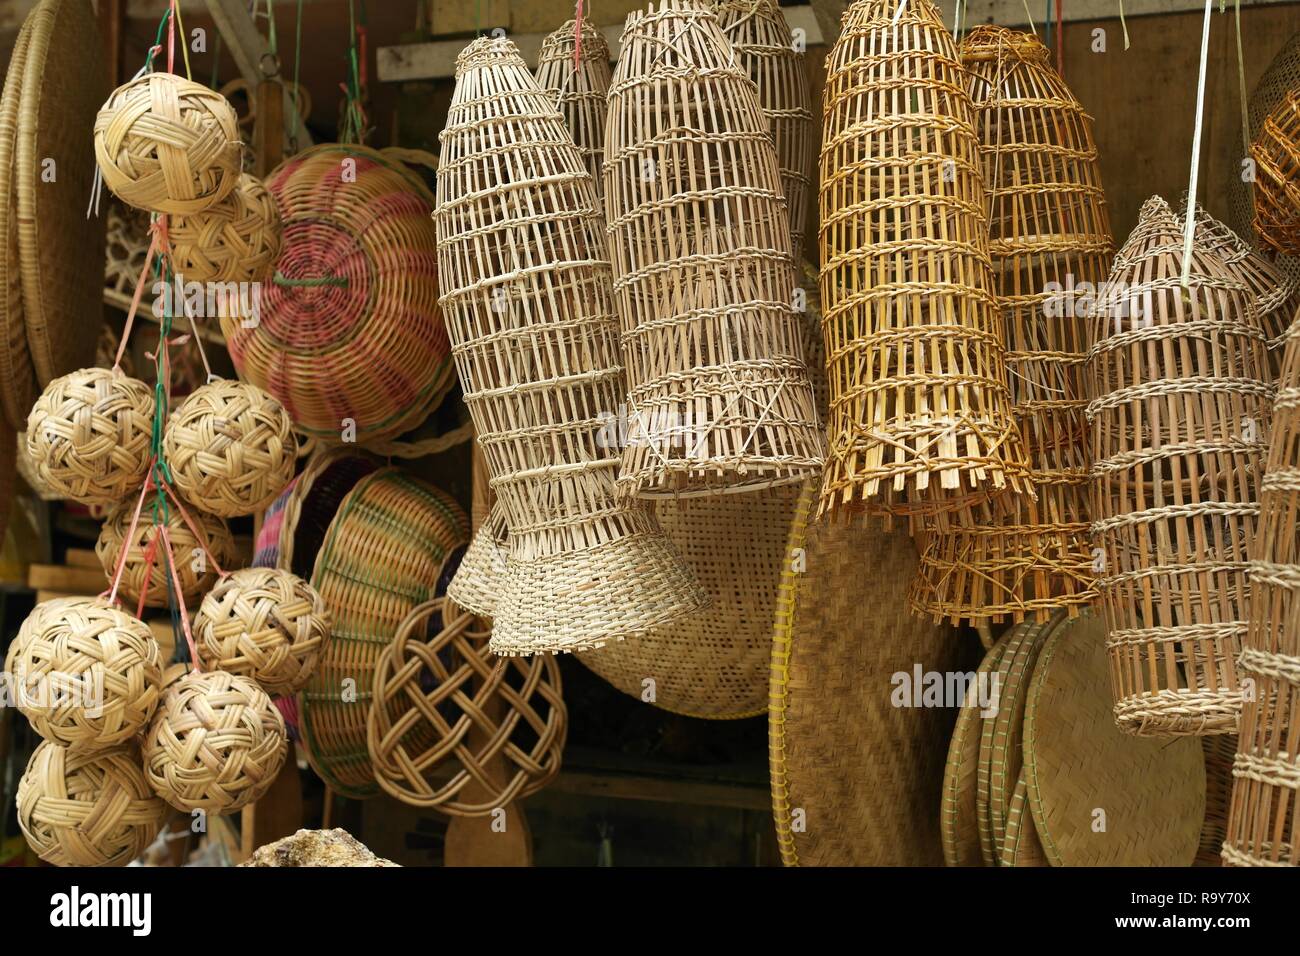 Rattan products Stock Photo